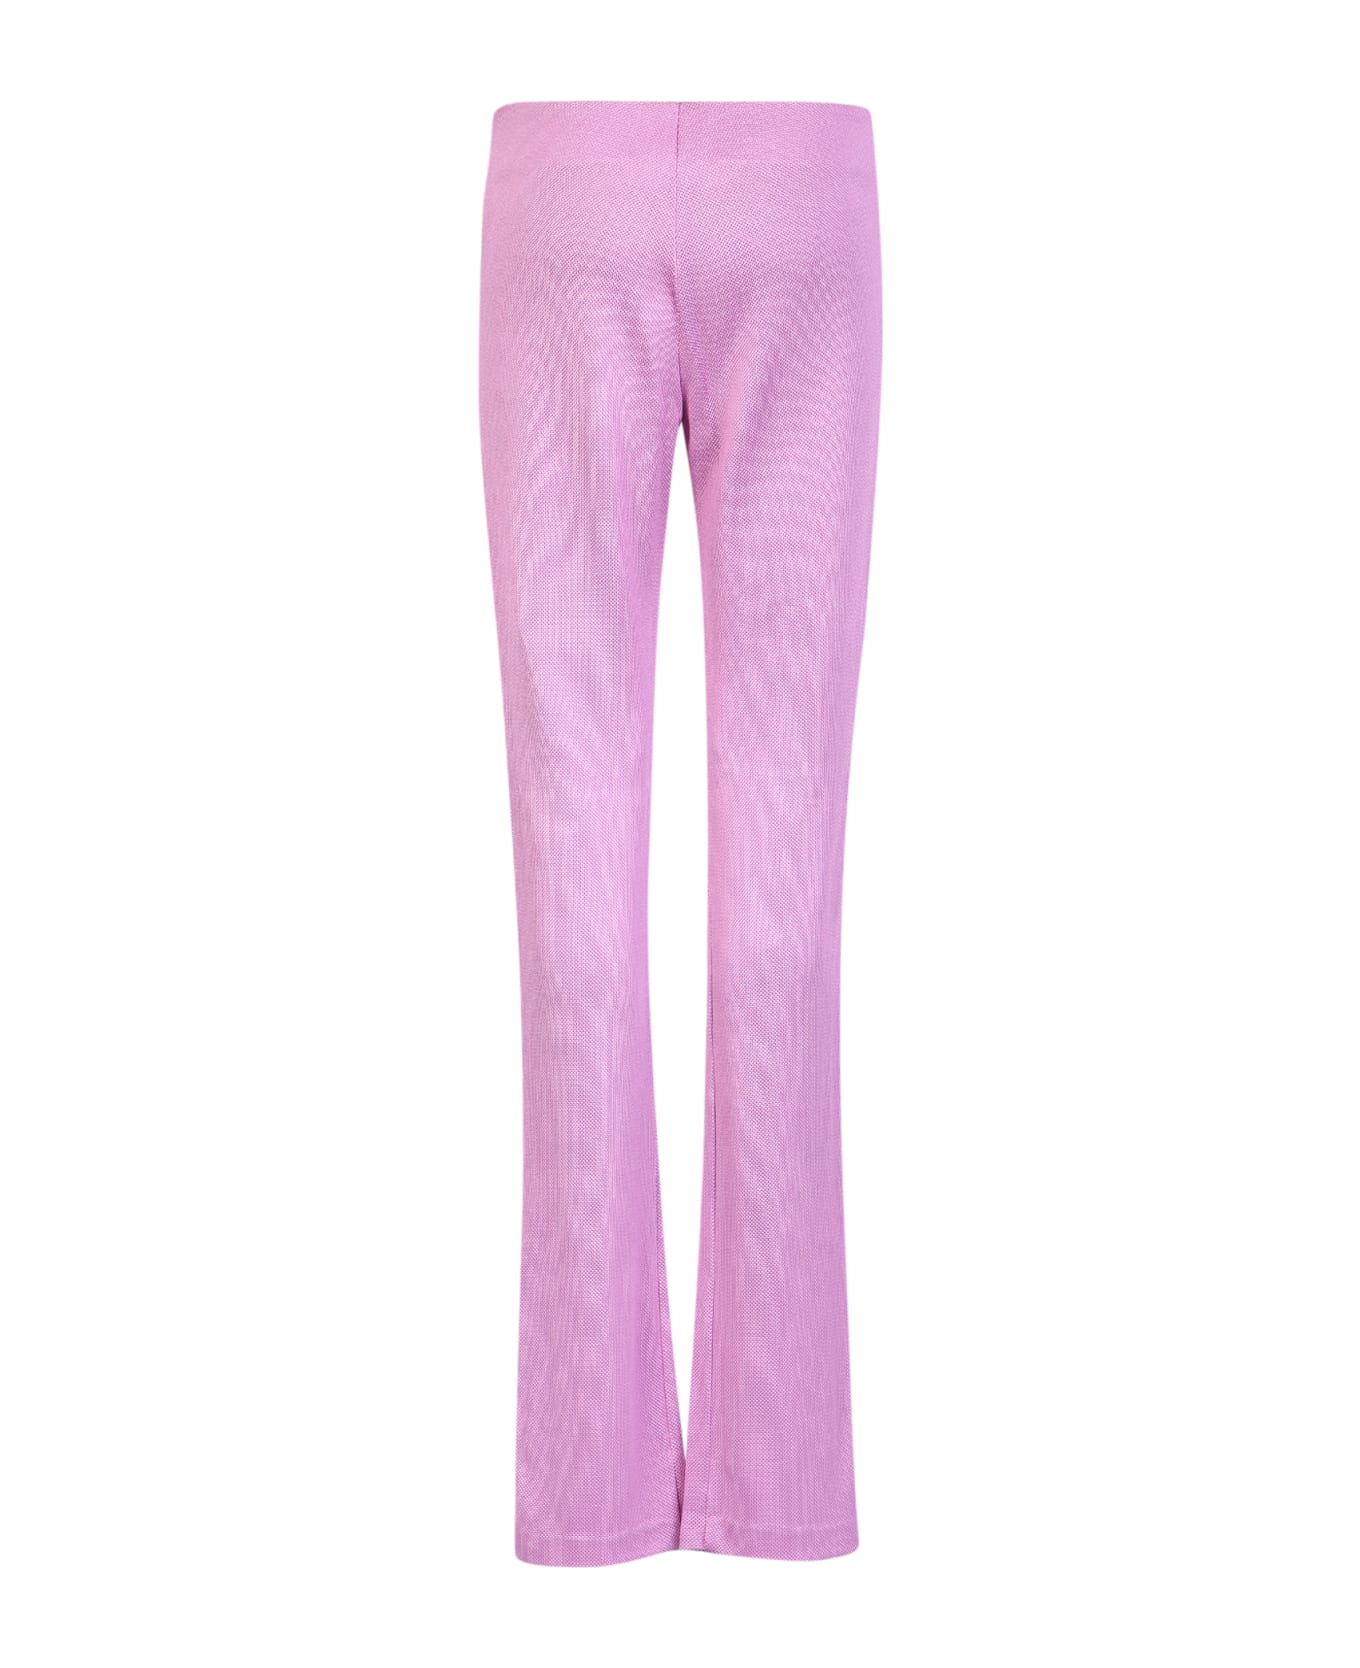 1017 ALYX 9SM Mauve Knitted Leggings - Pink ボトムス